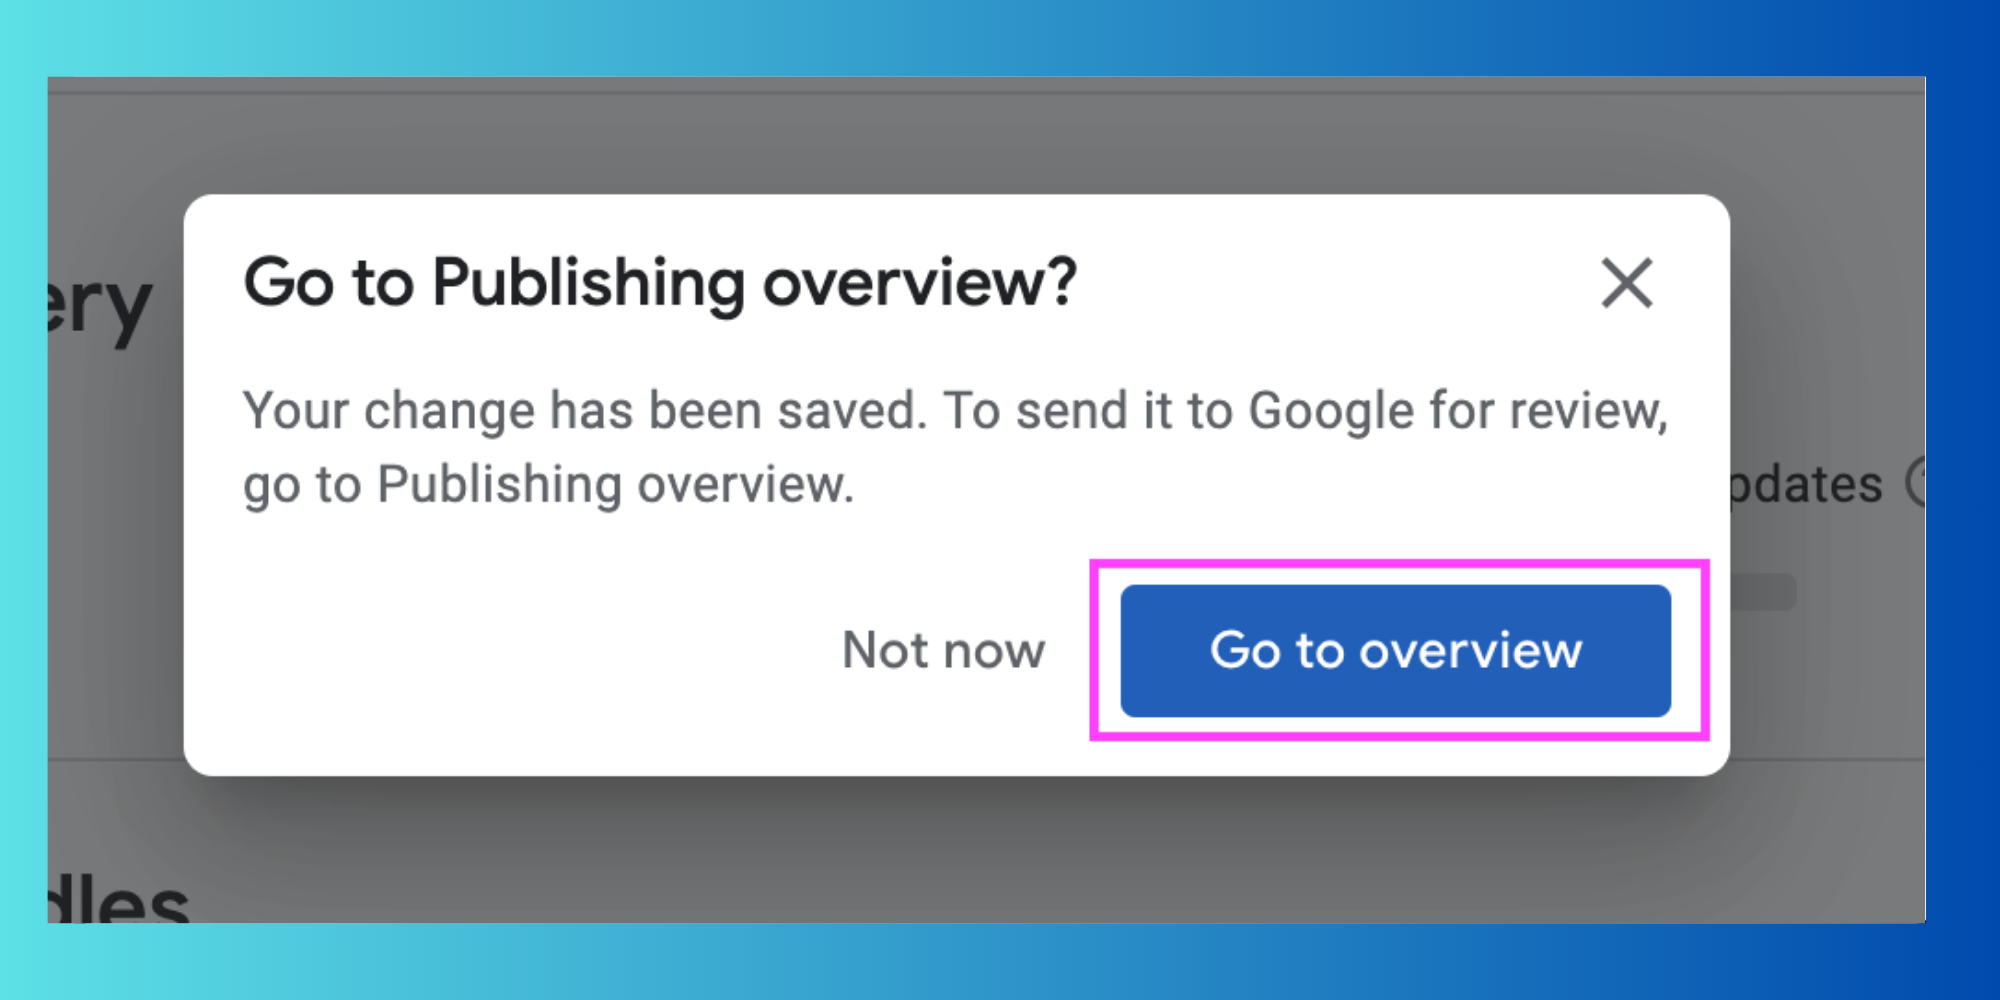 Go to (Publishing) overview button